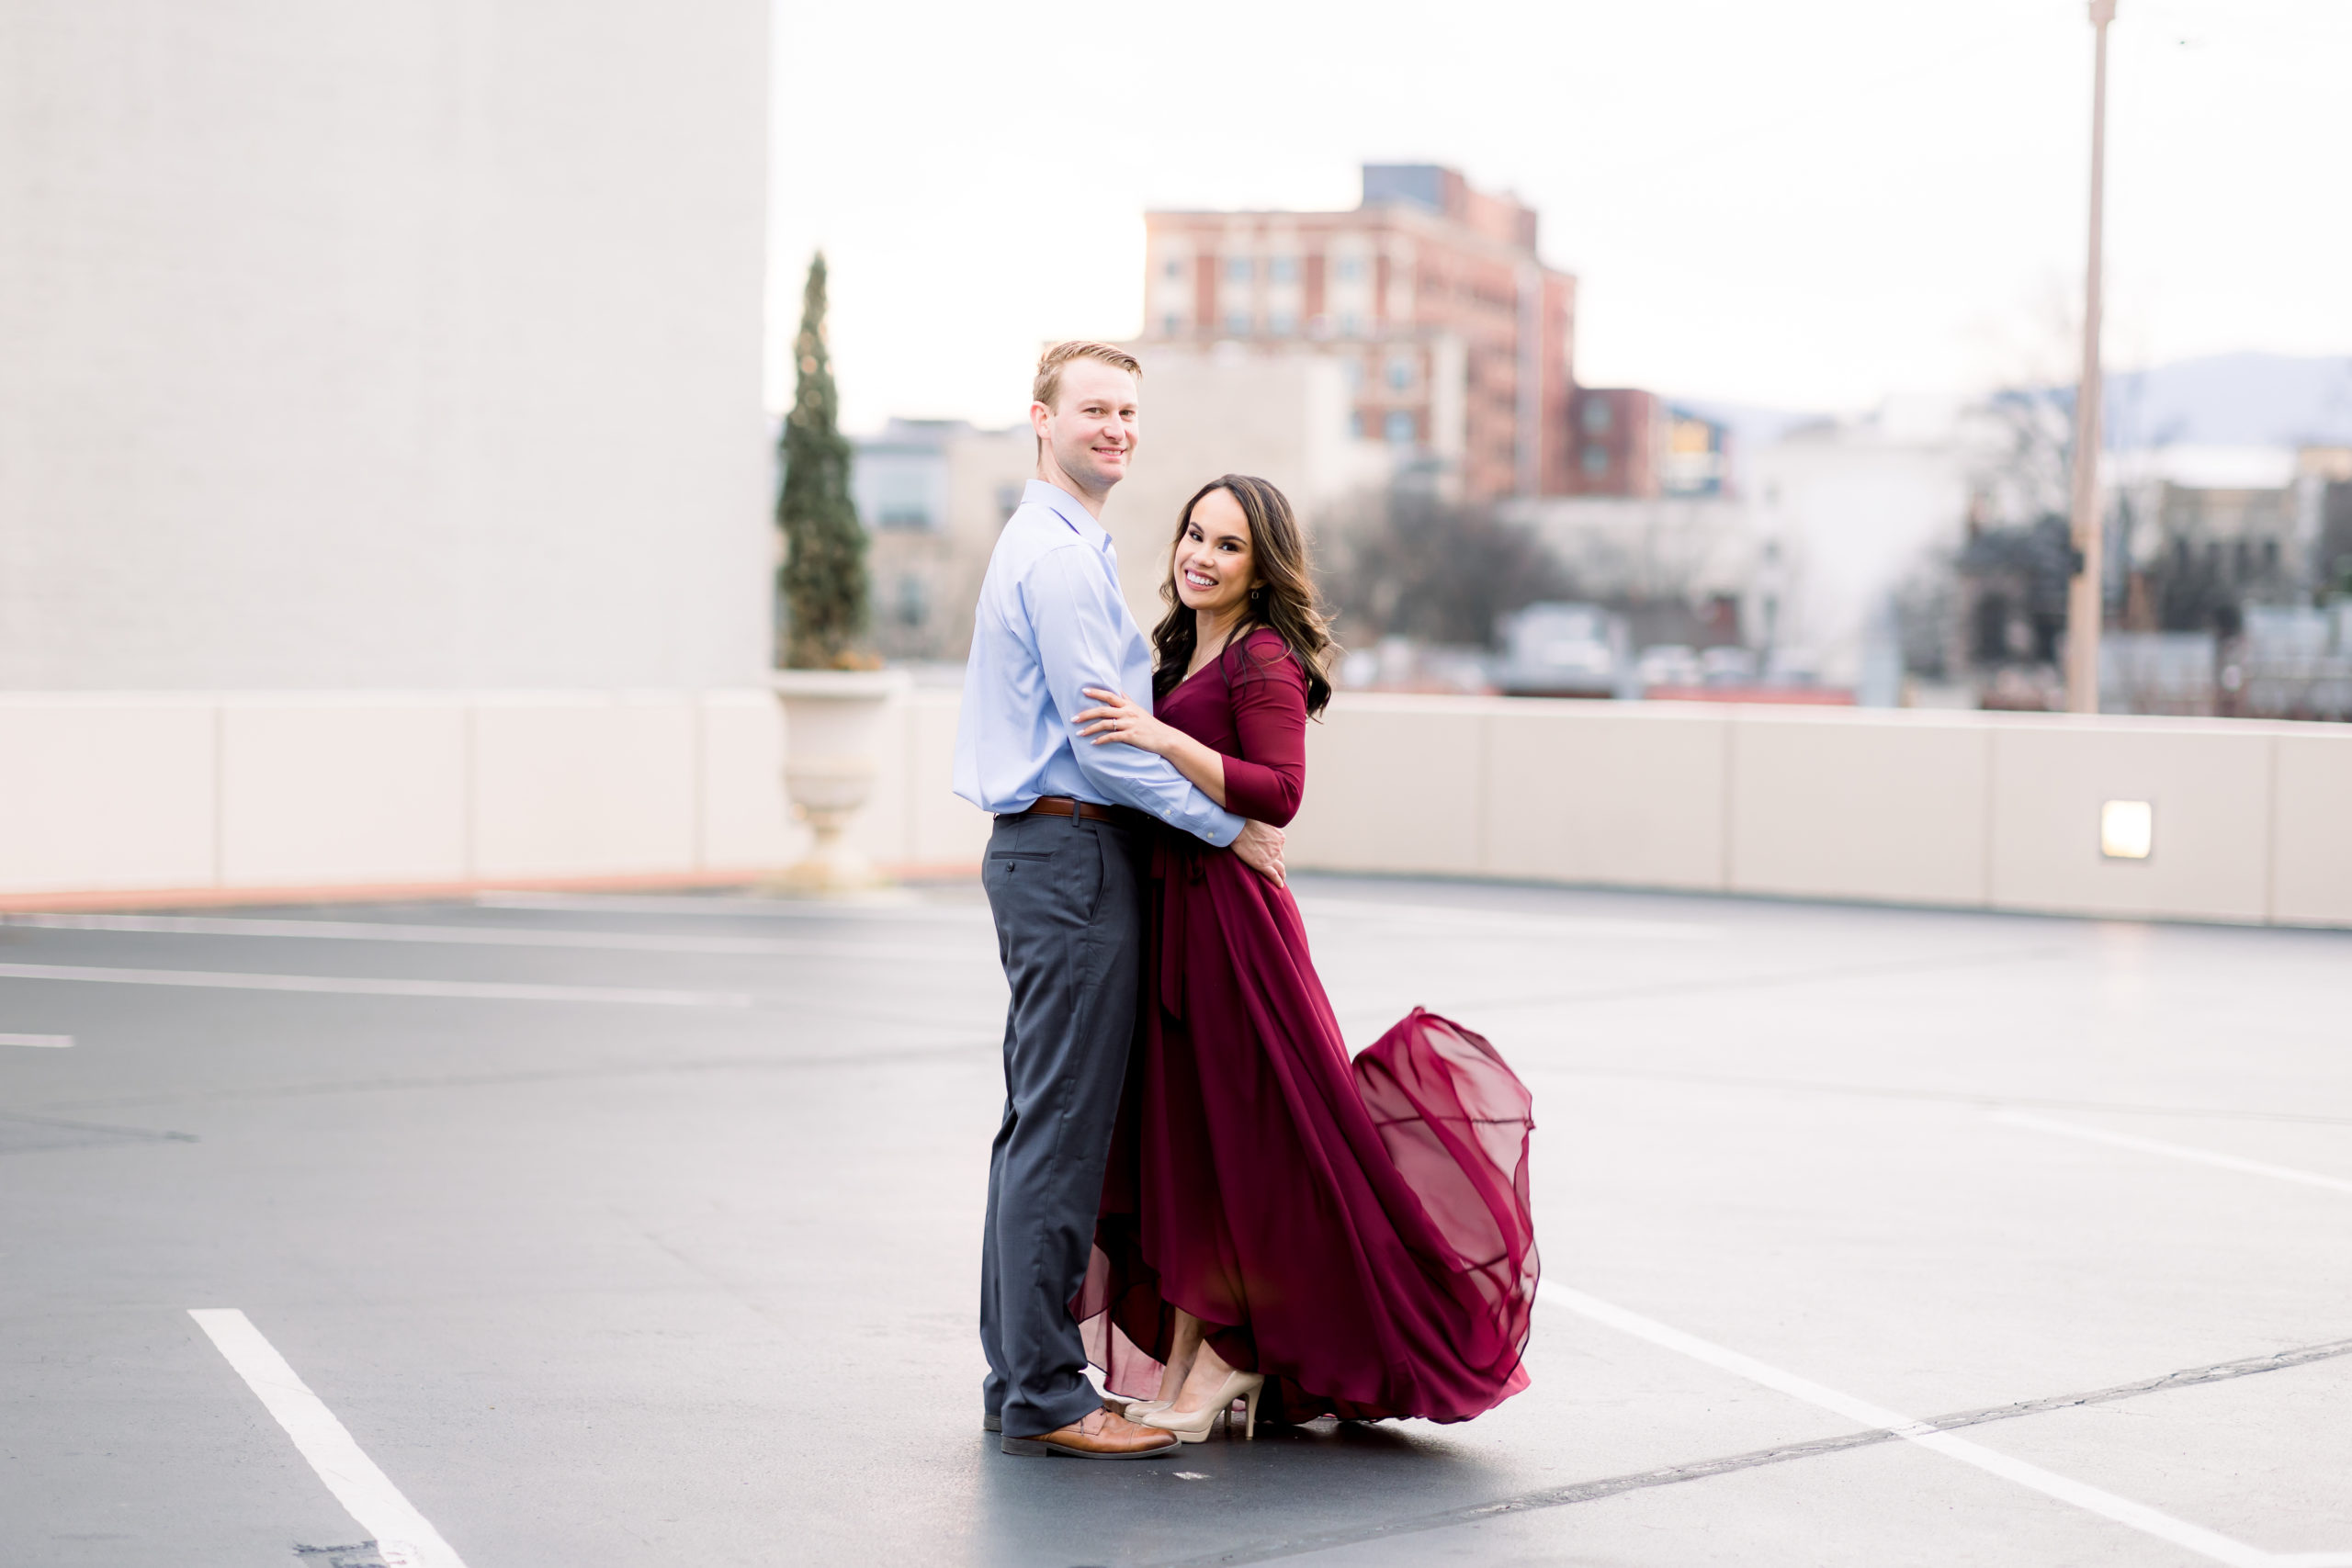 winter rooftop engagement photos by chattanooga wedding photographer alyssa rachelle photography